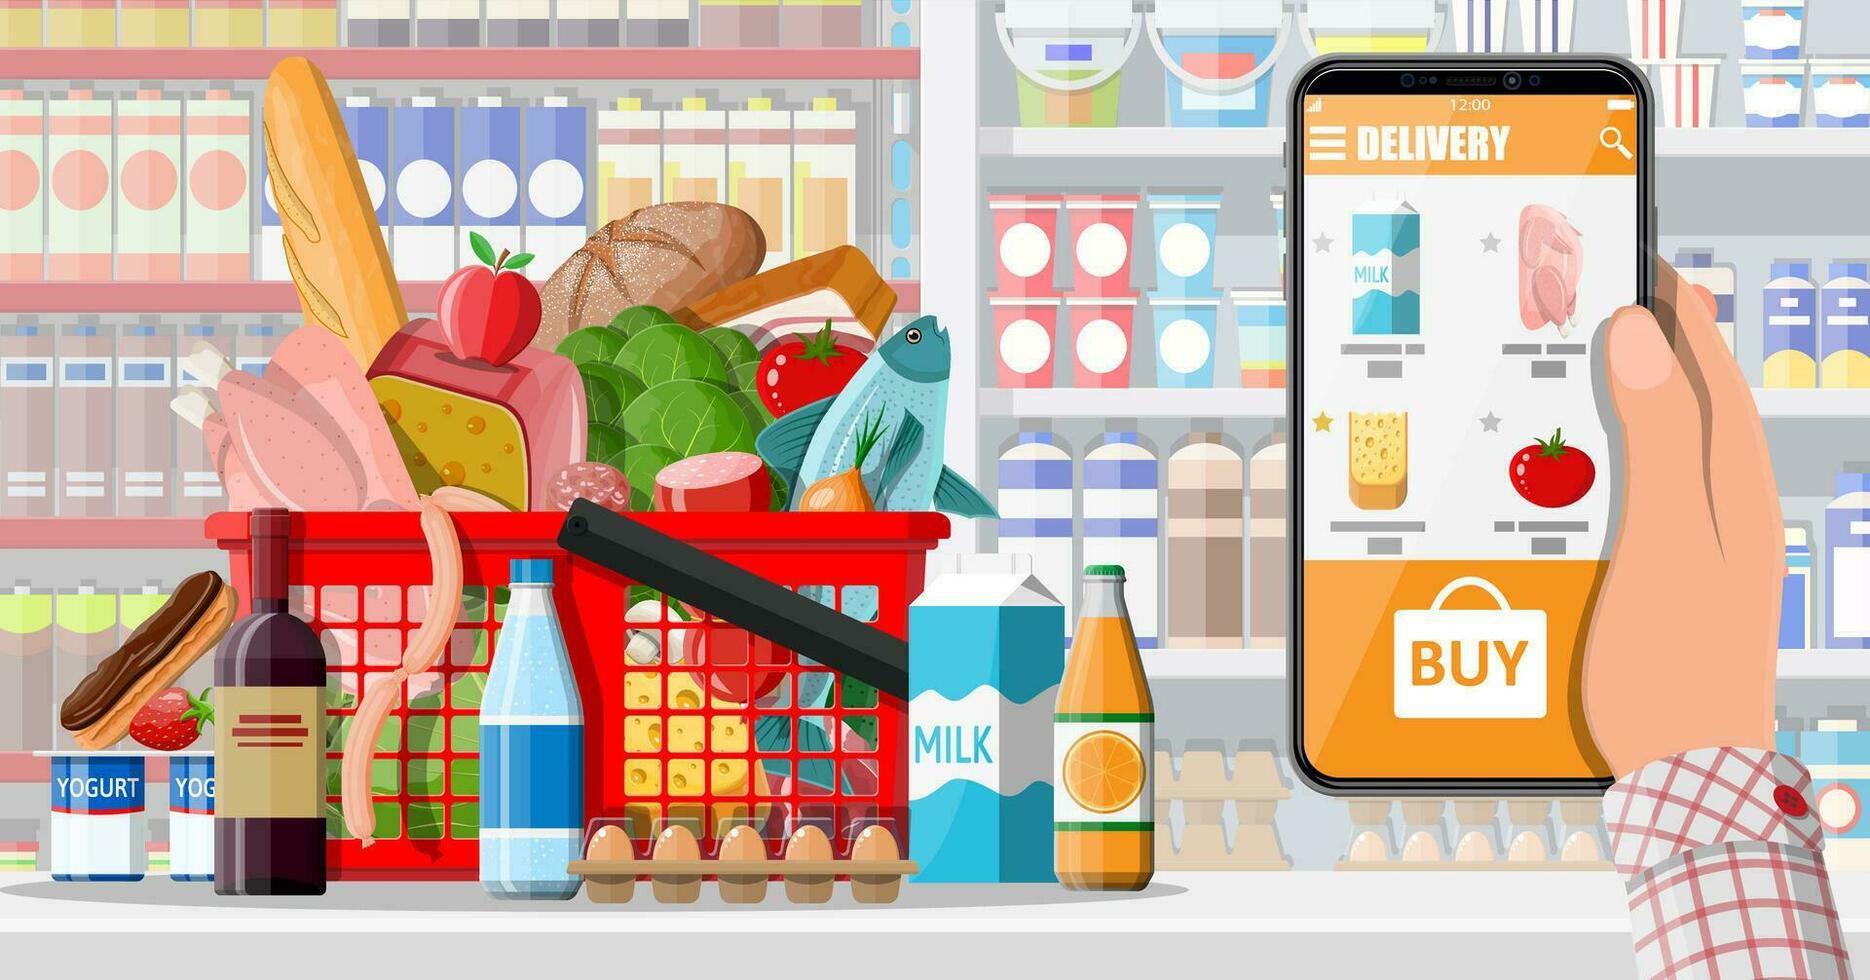 Hand holding smartphone with shopping app. Grocery store delivery. Internet order. Online supermaket. Shopping basket with food and drinks. Milk, vegetables, meat, cheese. Flat vector illustration